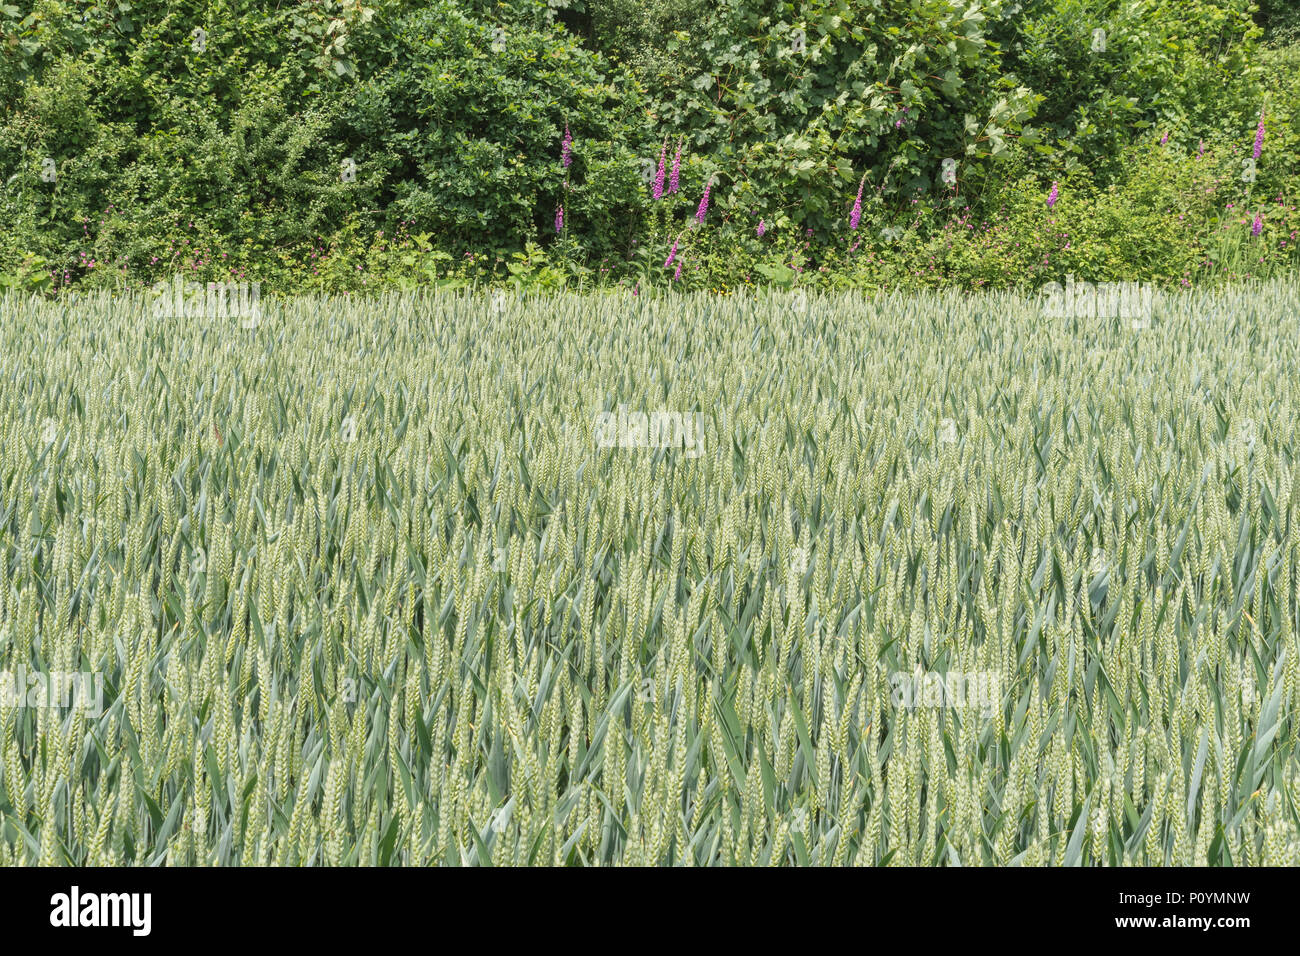 Wheat / Triticum crop growing in front of natural hedgerow with wild Foxglove / Digitalis purpurea growing in background. Food growing in the field. Stock Photo